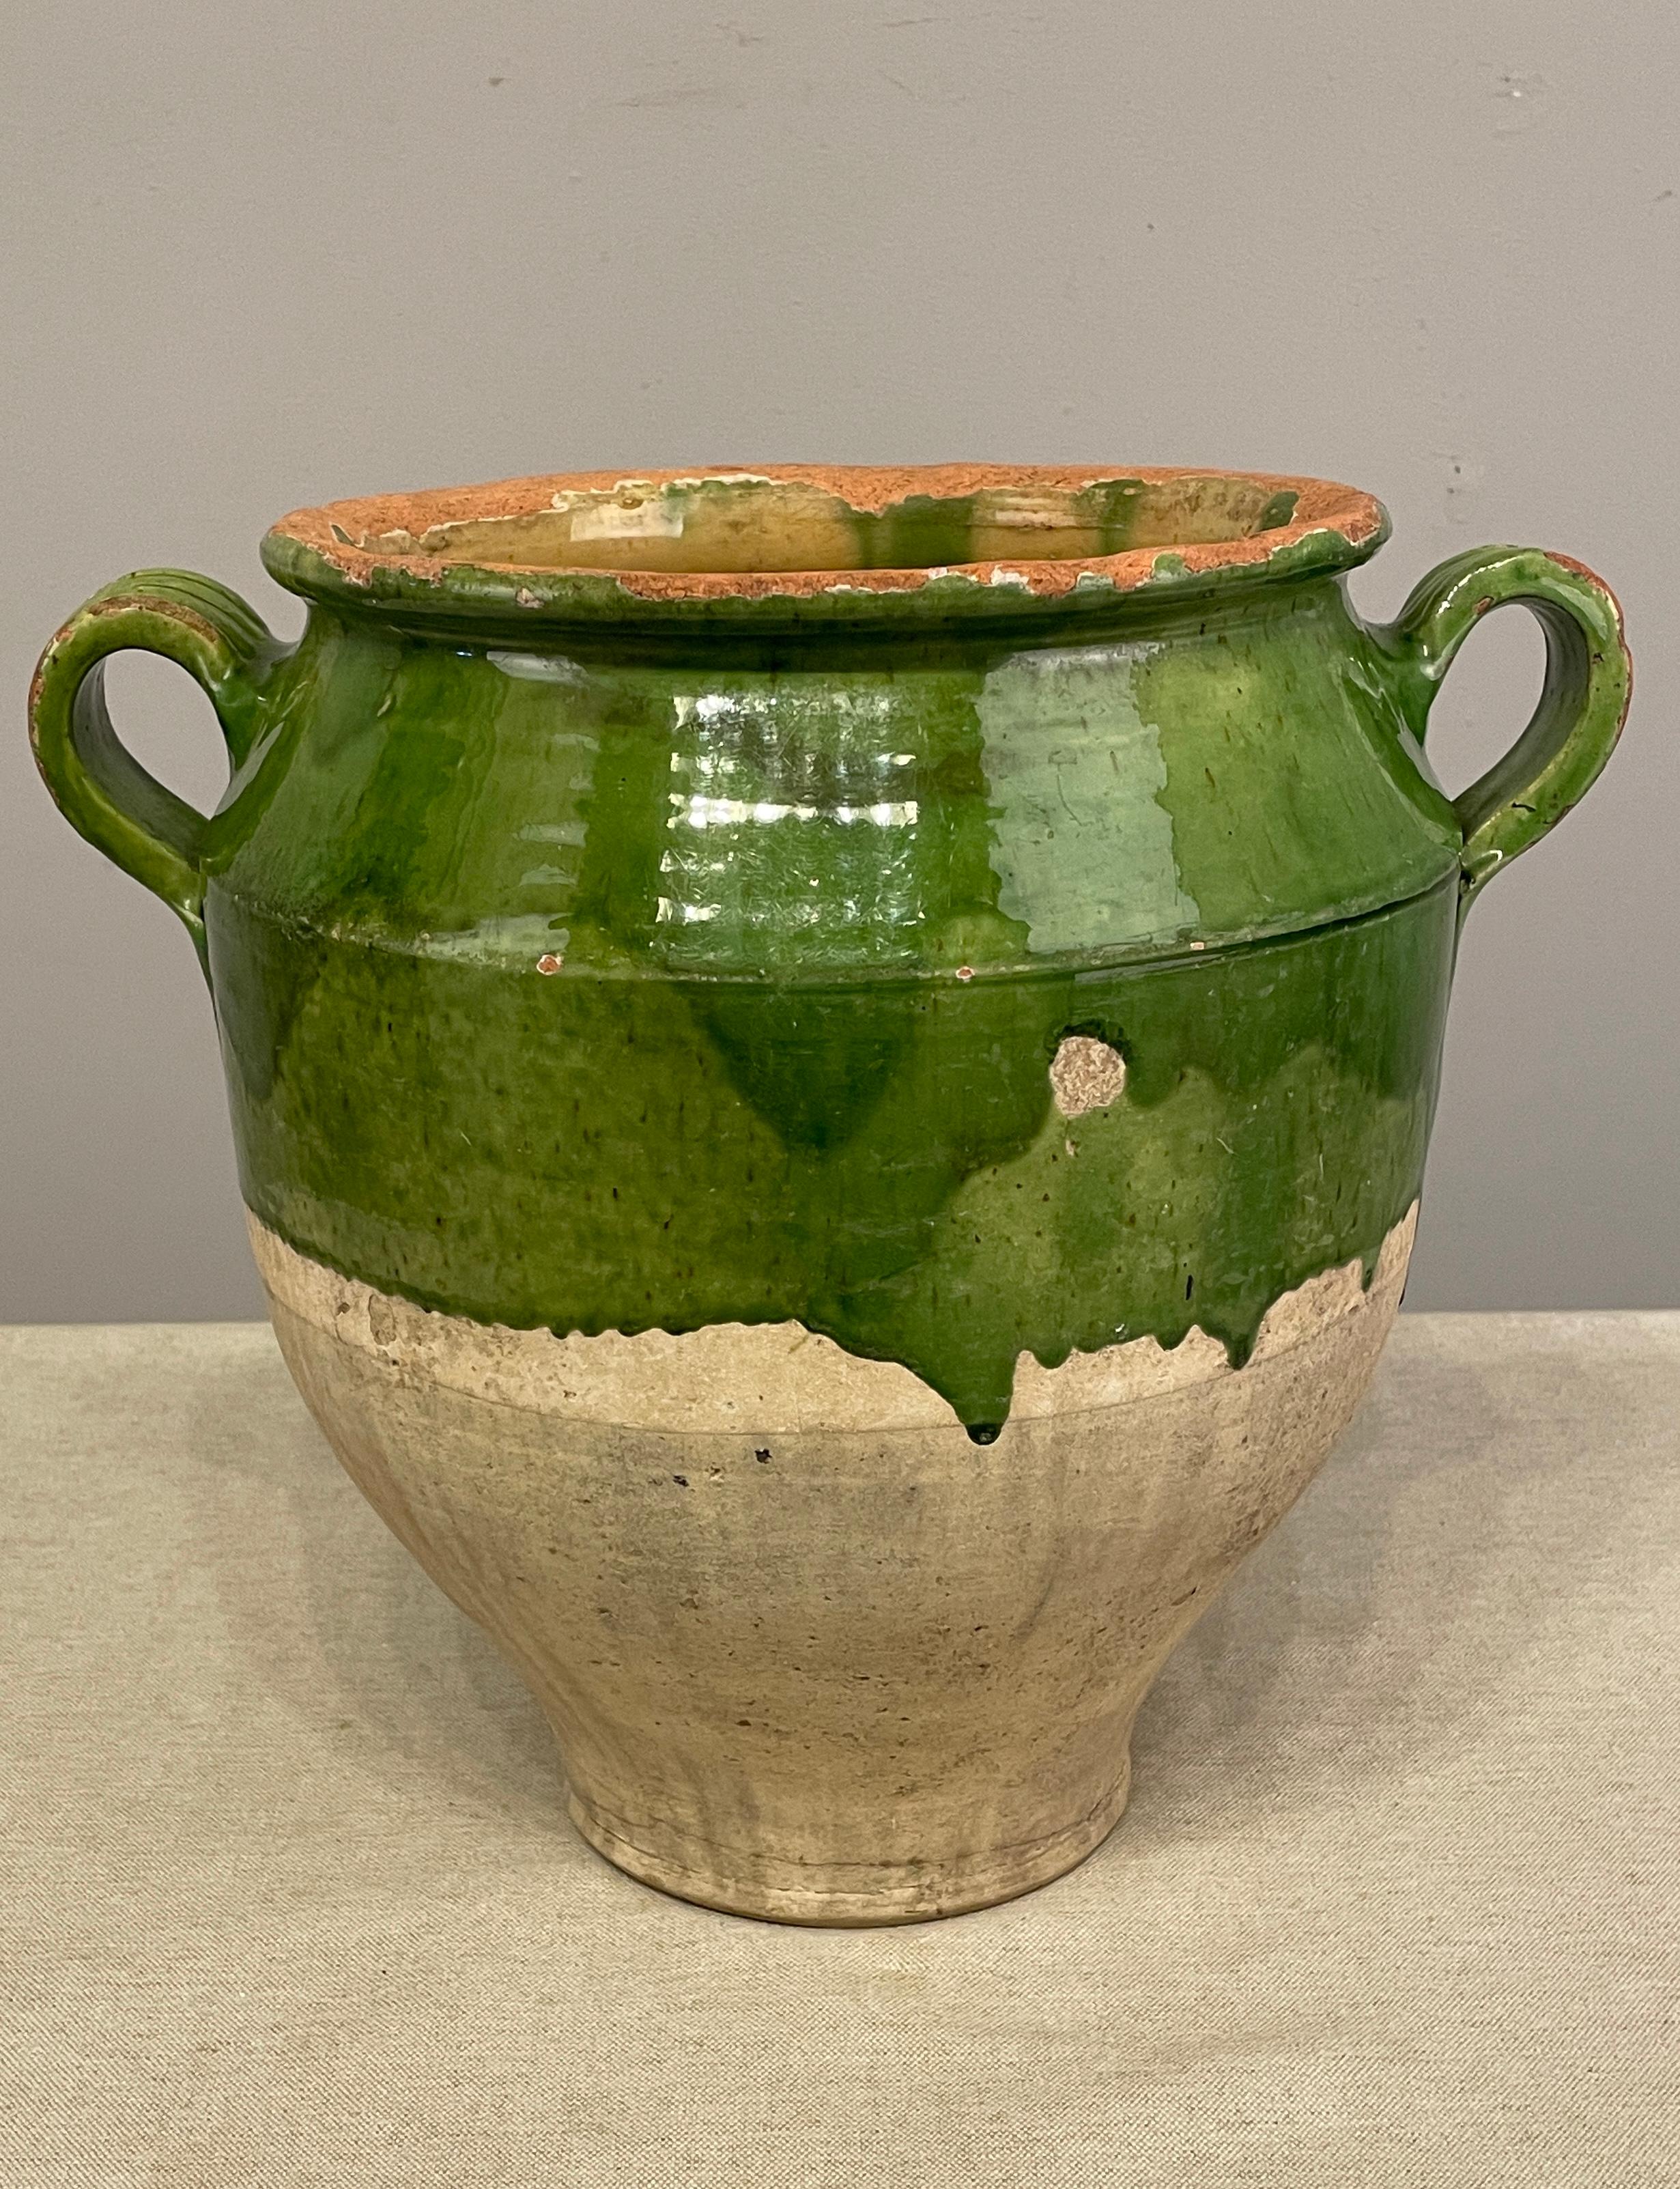 An earthenware confit pot from the Southwest of France with traditional green glaze . Minor chips and losses to glaze. These ordinary earthenware vessels were once used daily in the French country home and have beautiful rustic glazes of green,